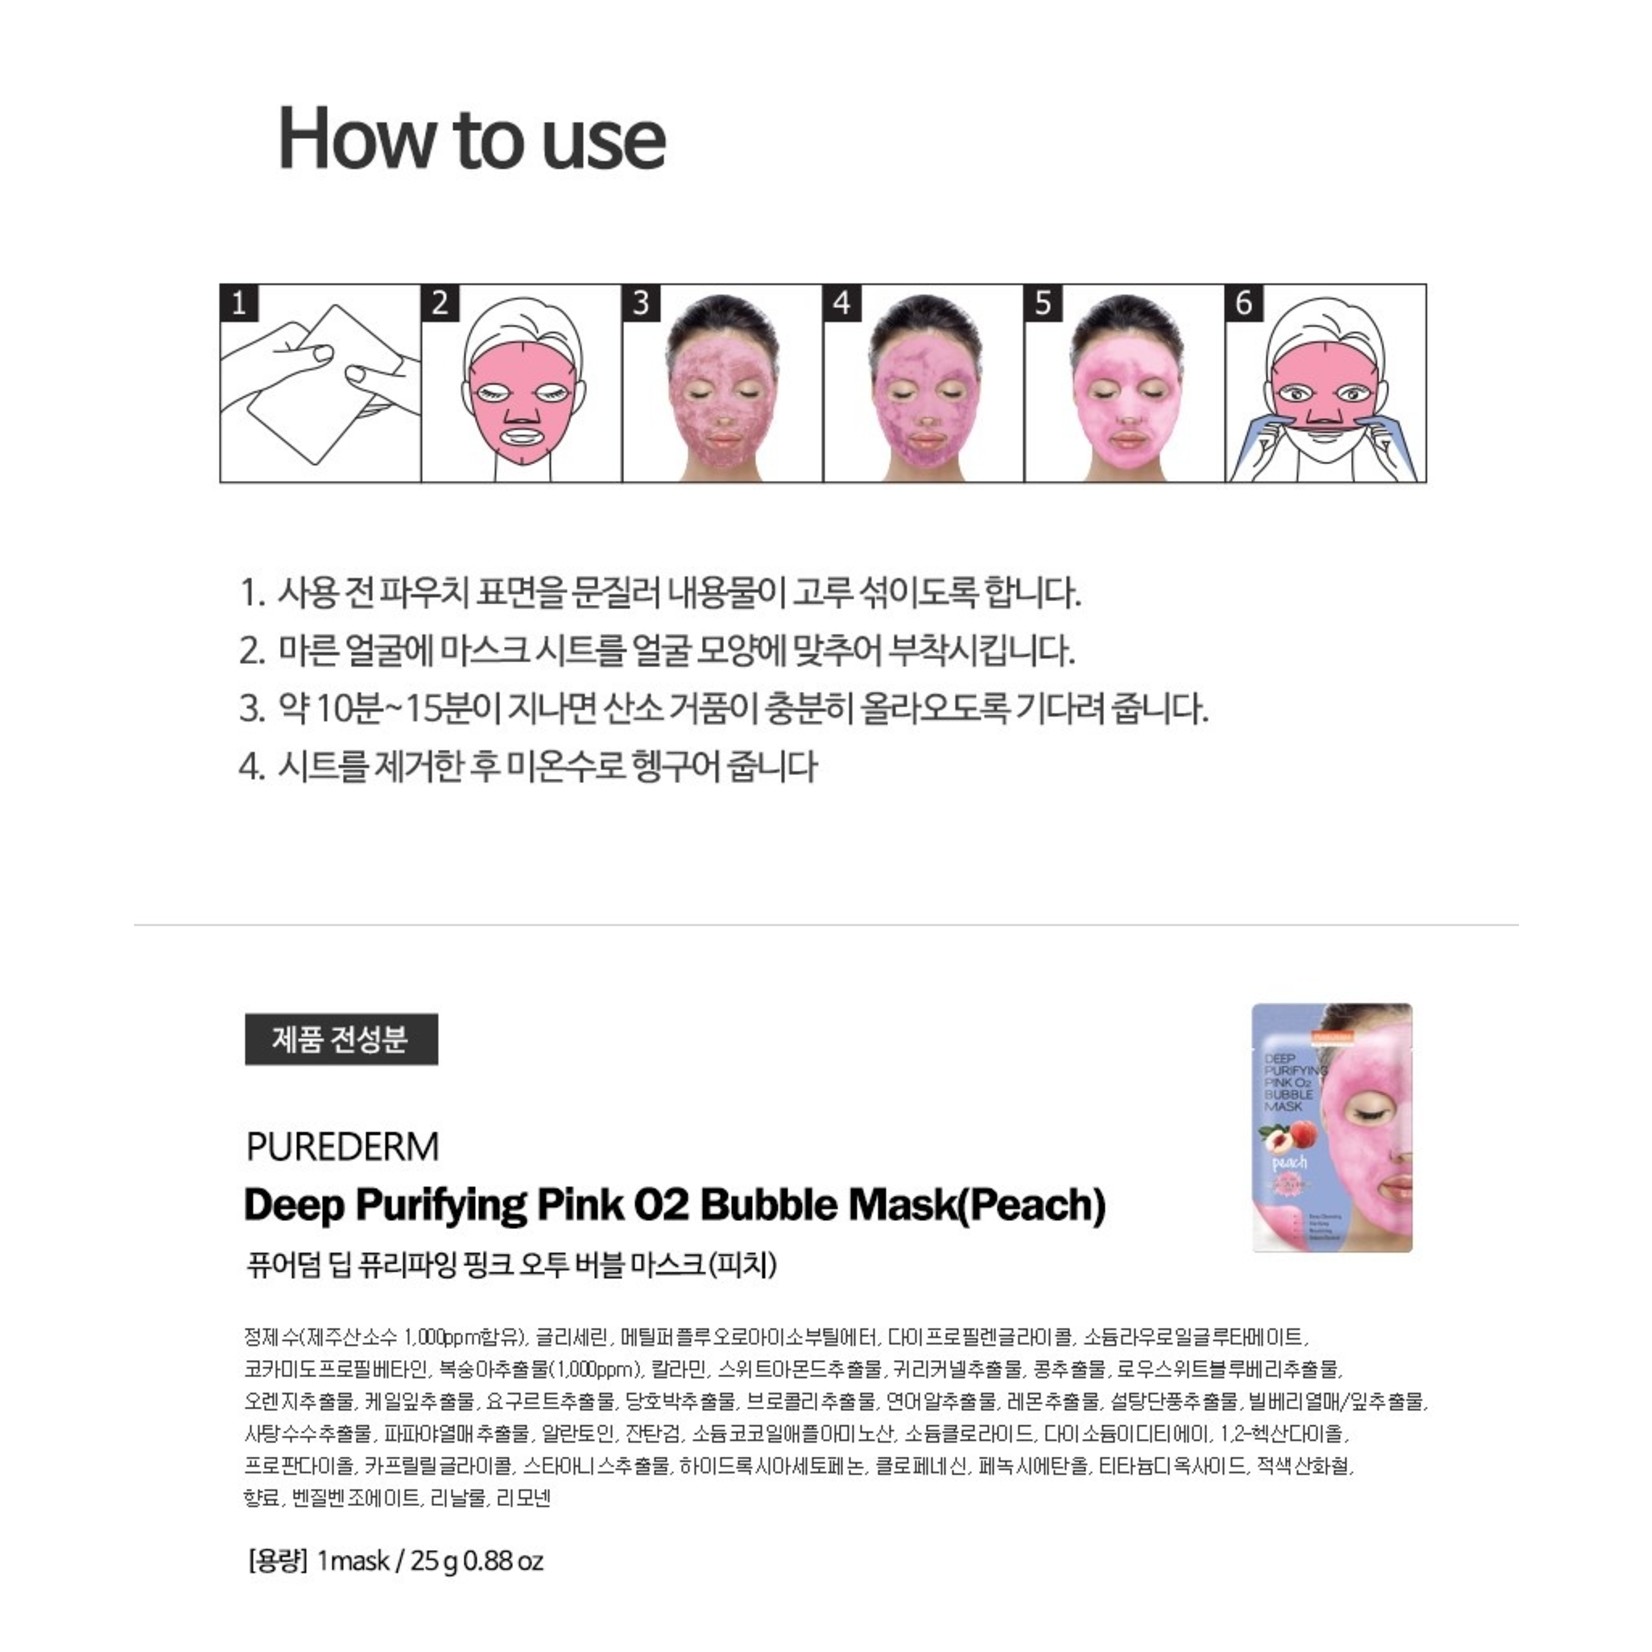 PUREDERM Deep Purifying Pink O2 Bubble Mask (Pfirsich)